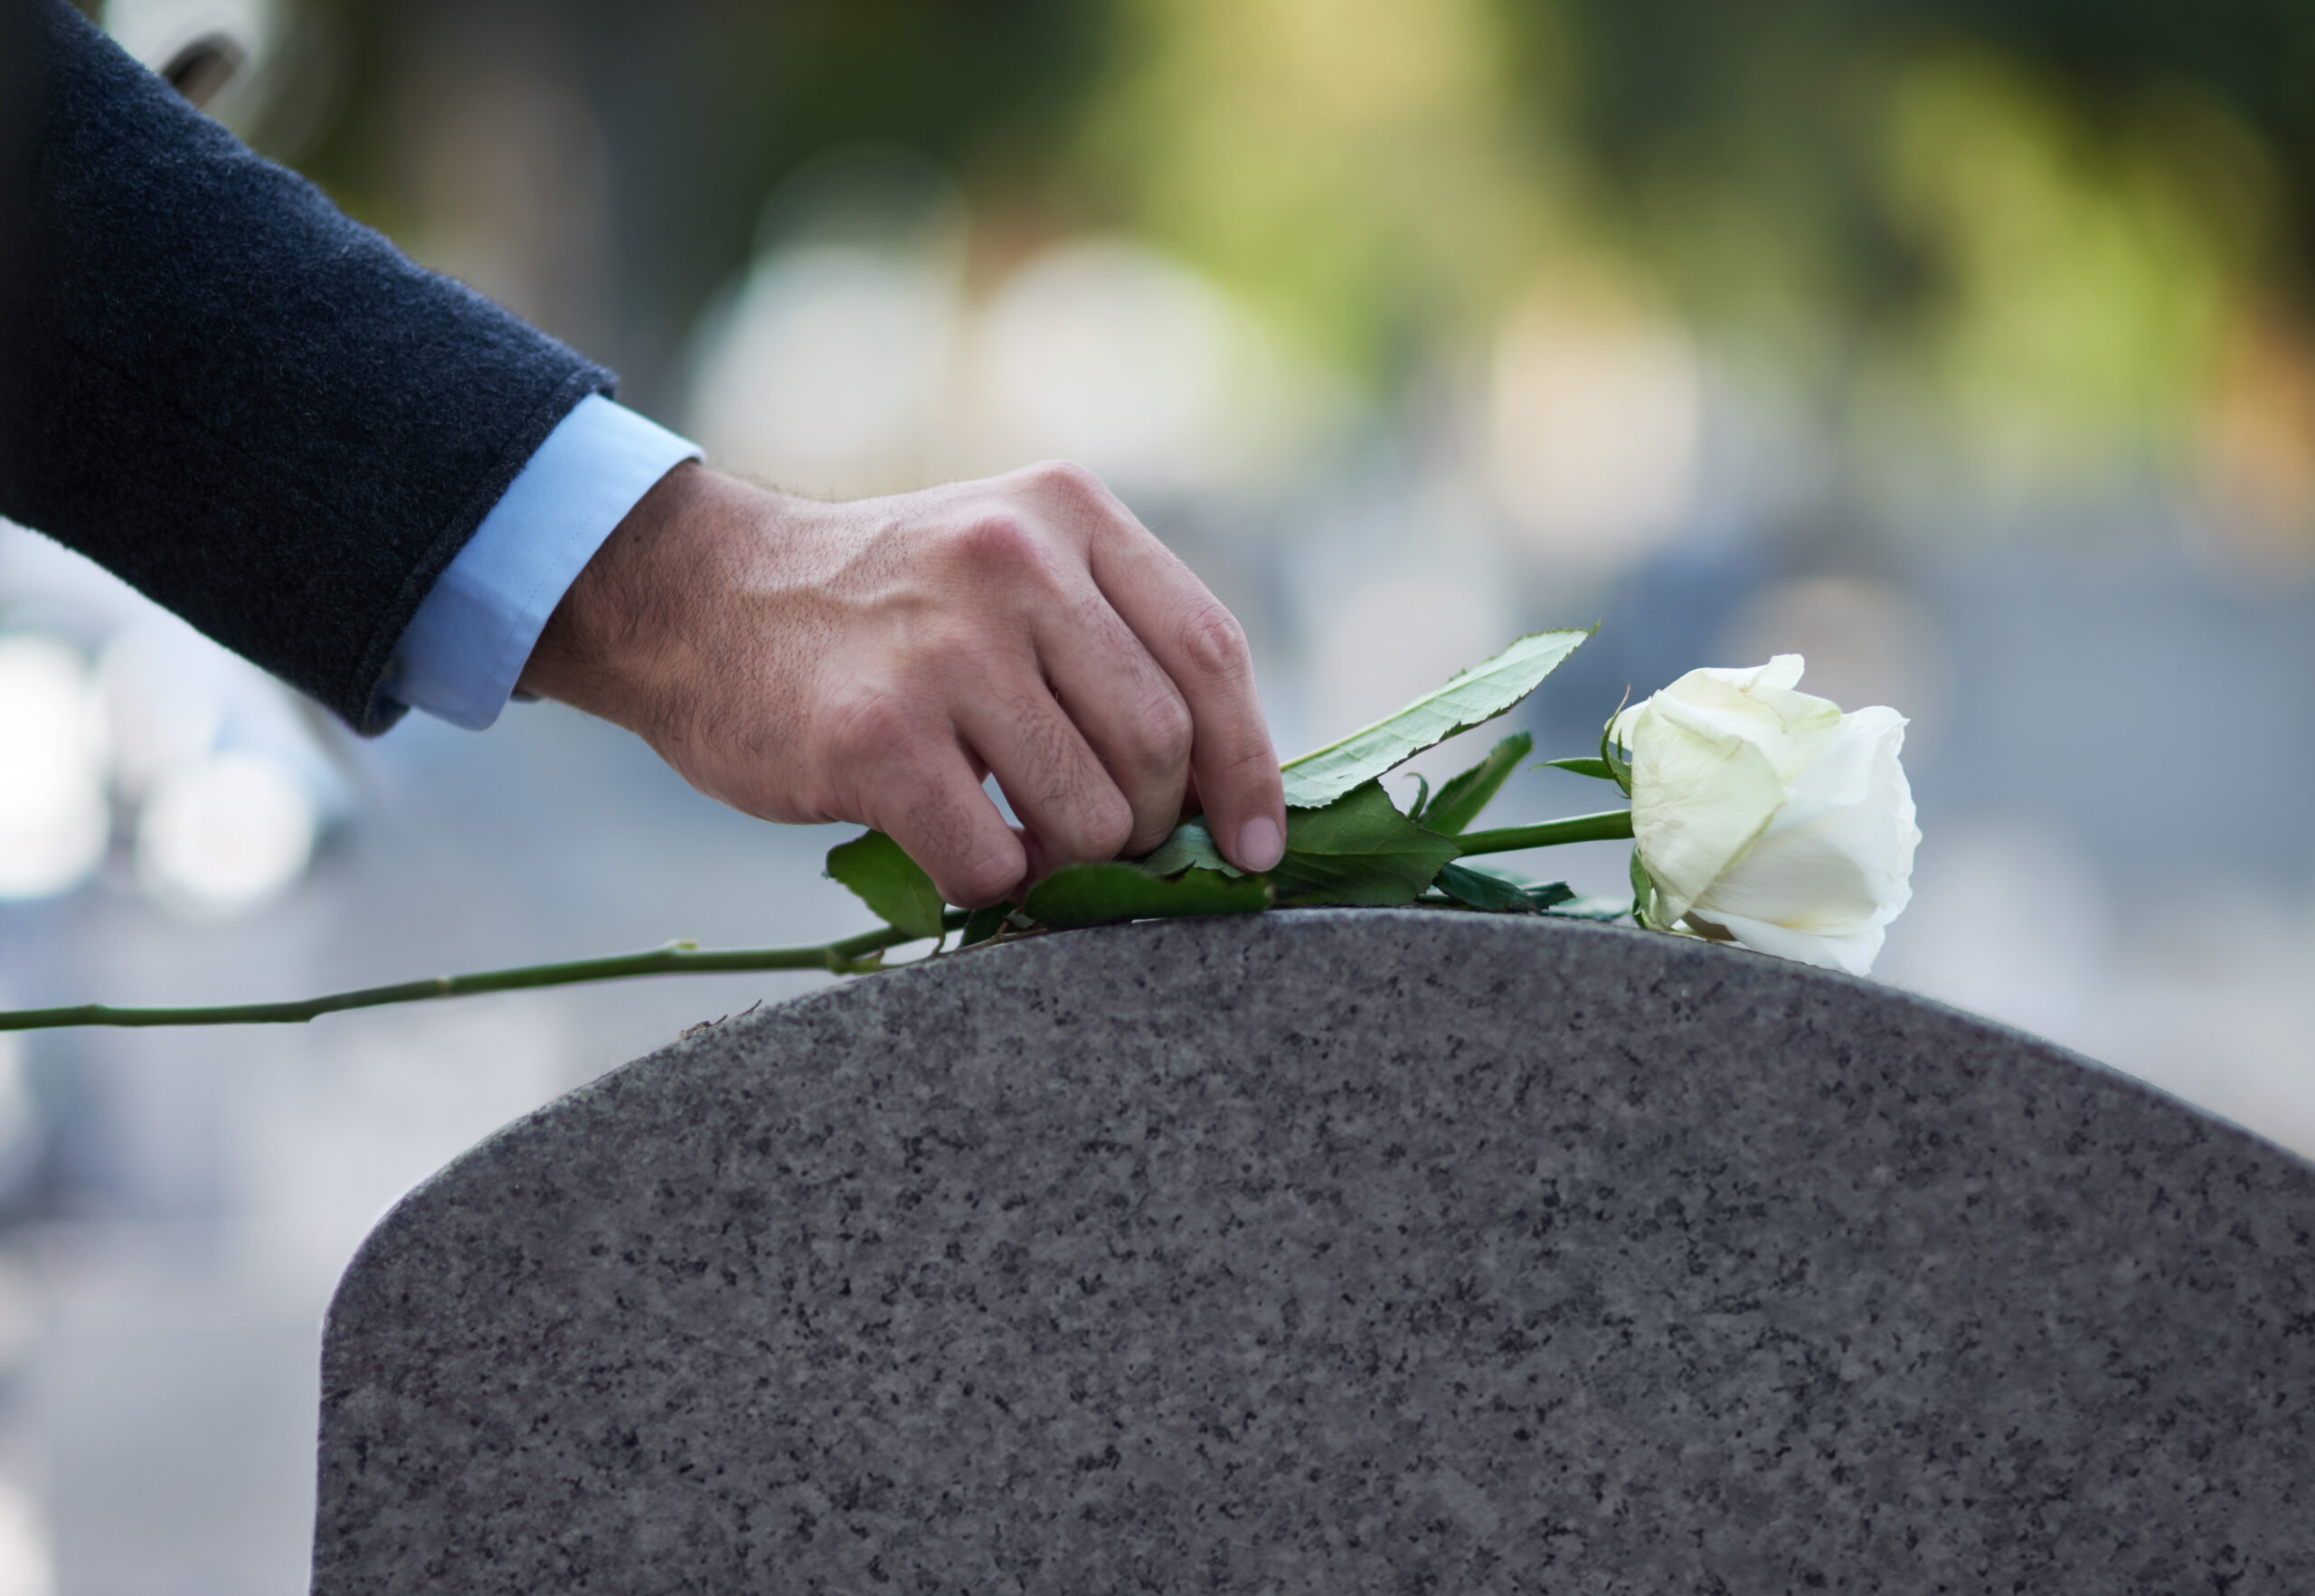 Recovering for the Wrongful Death of a Loved One in Florida